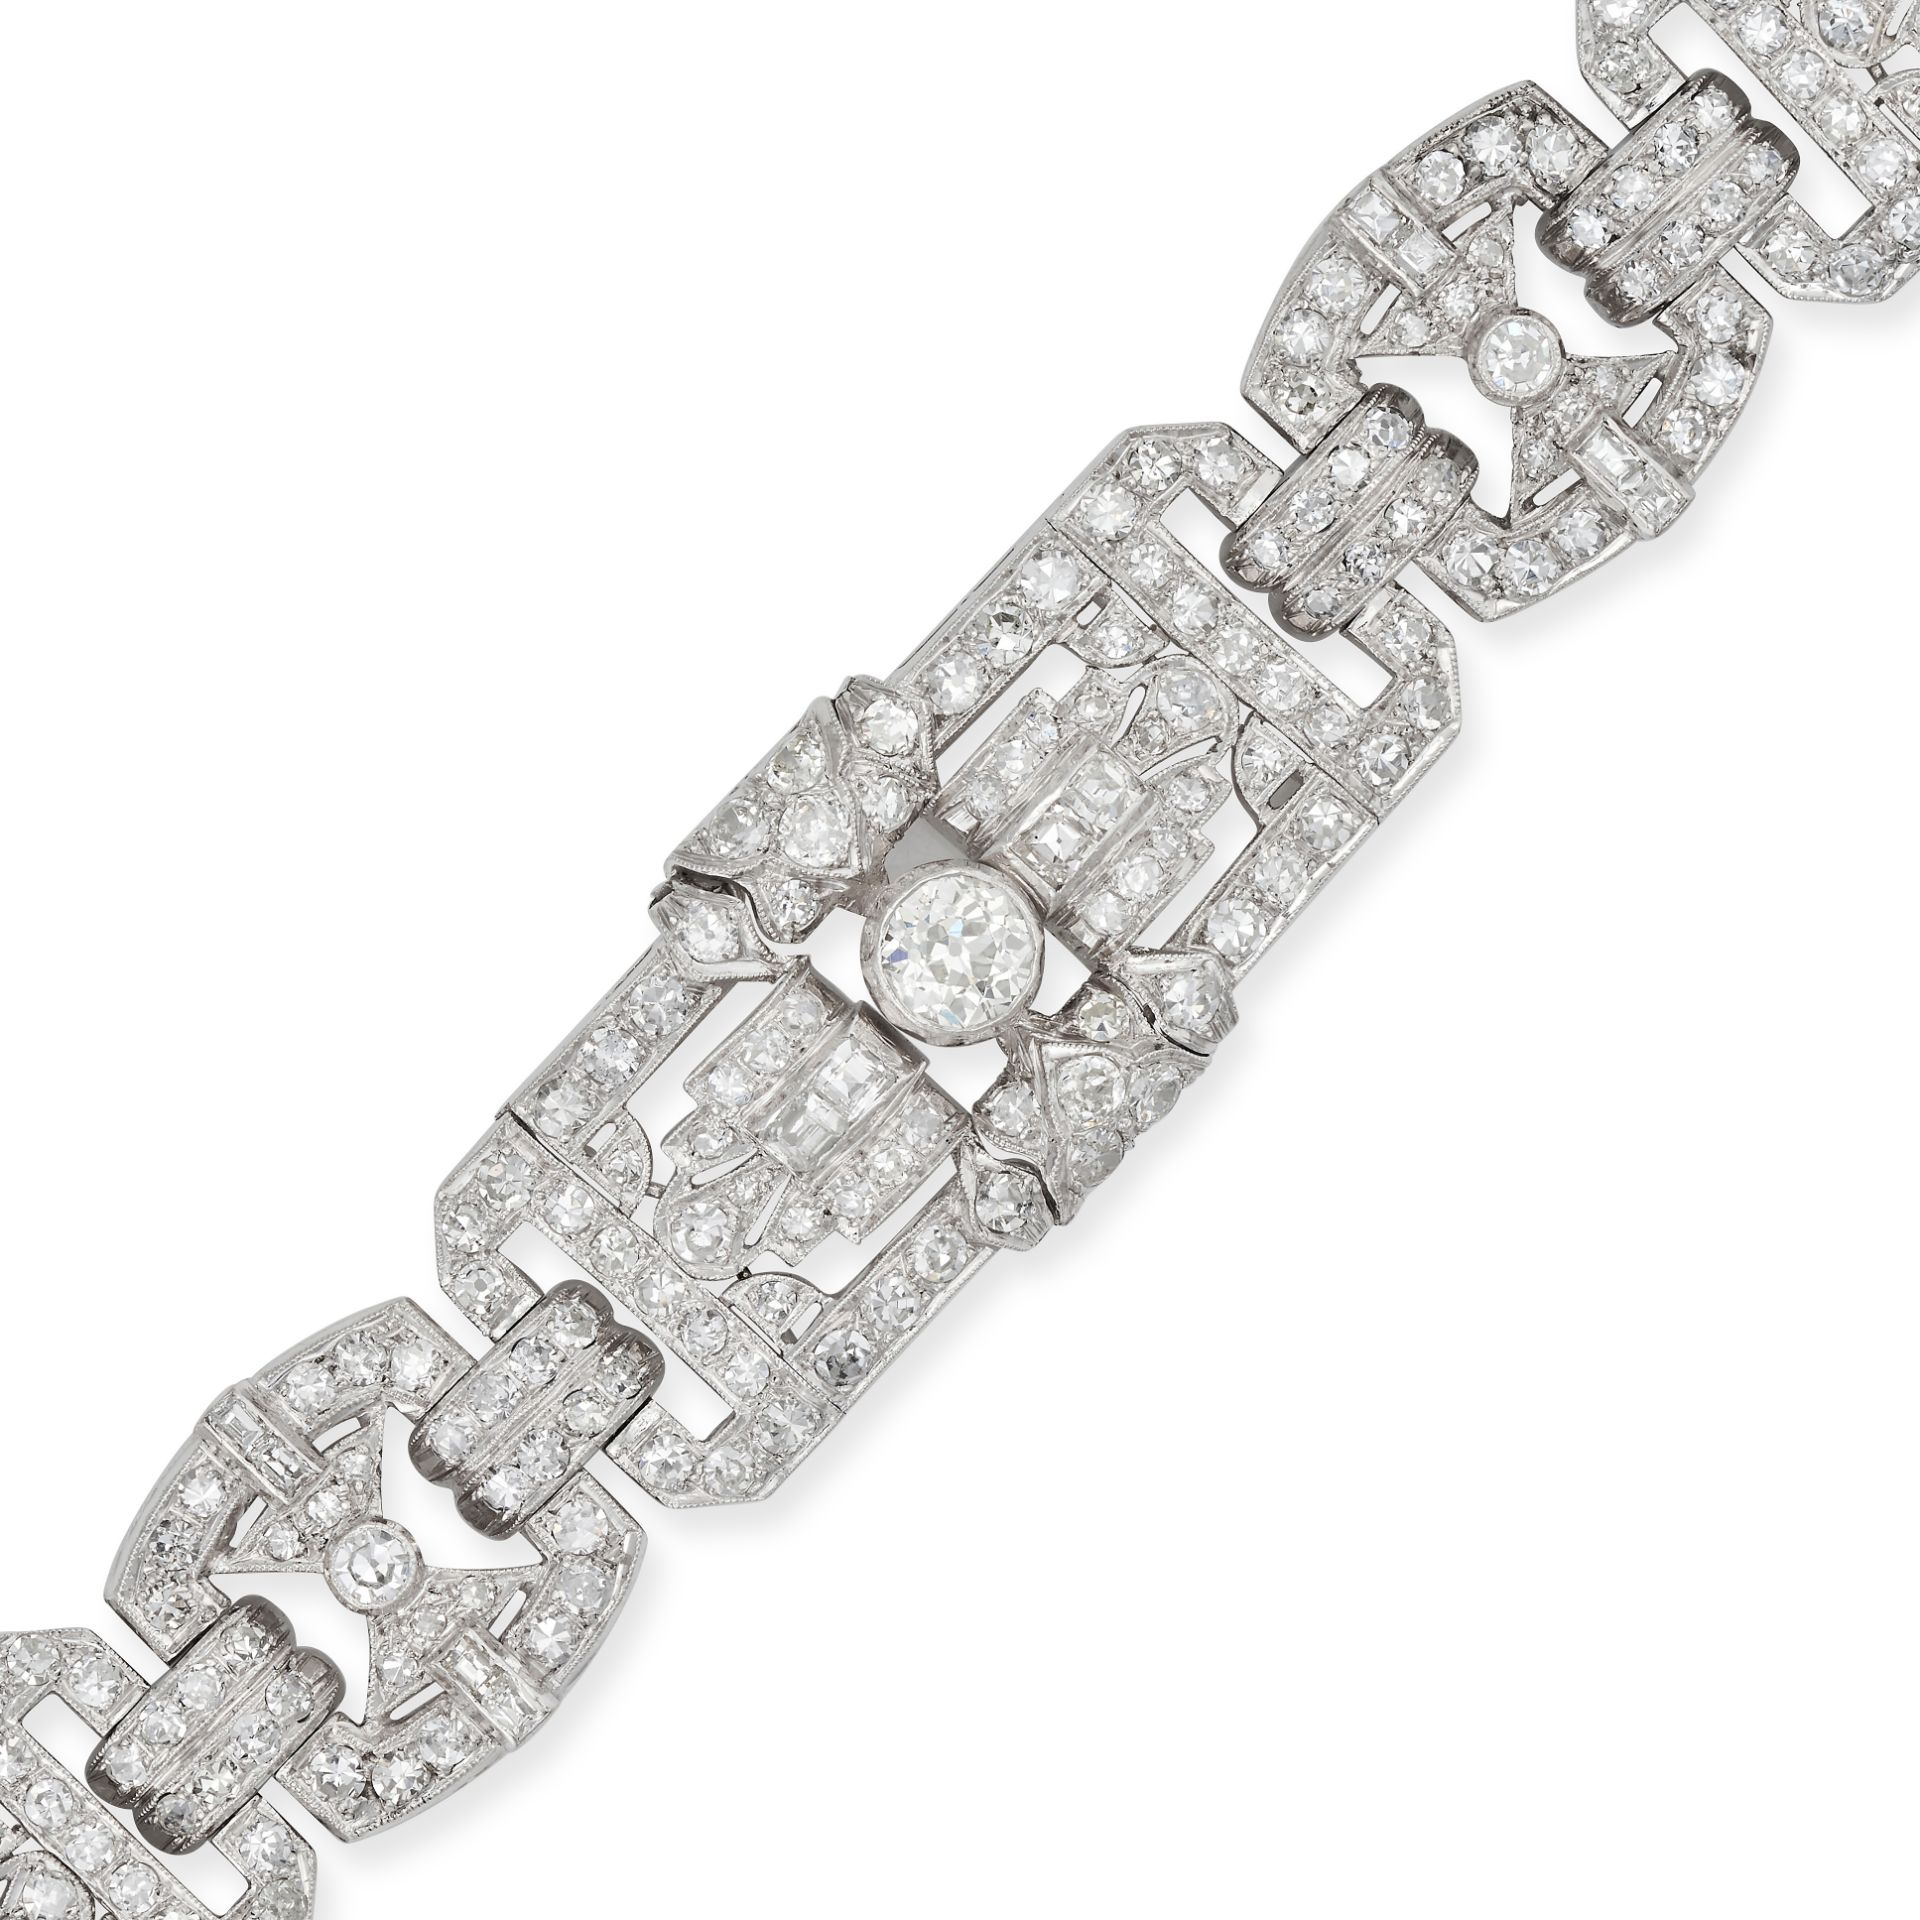 AN ART DECO DIAMOND BRACELET in platinum, comprising six geometric plaques set throughout with ol... - Image 3 of 3